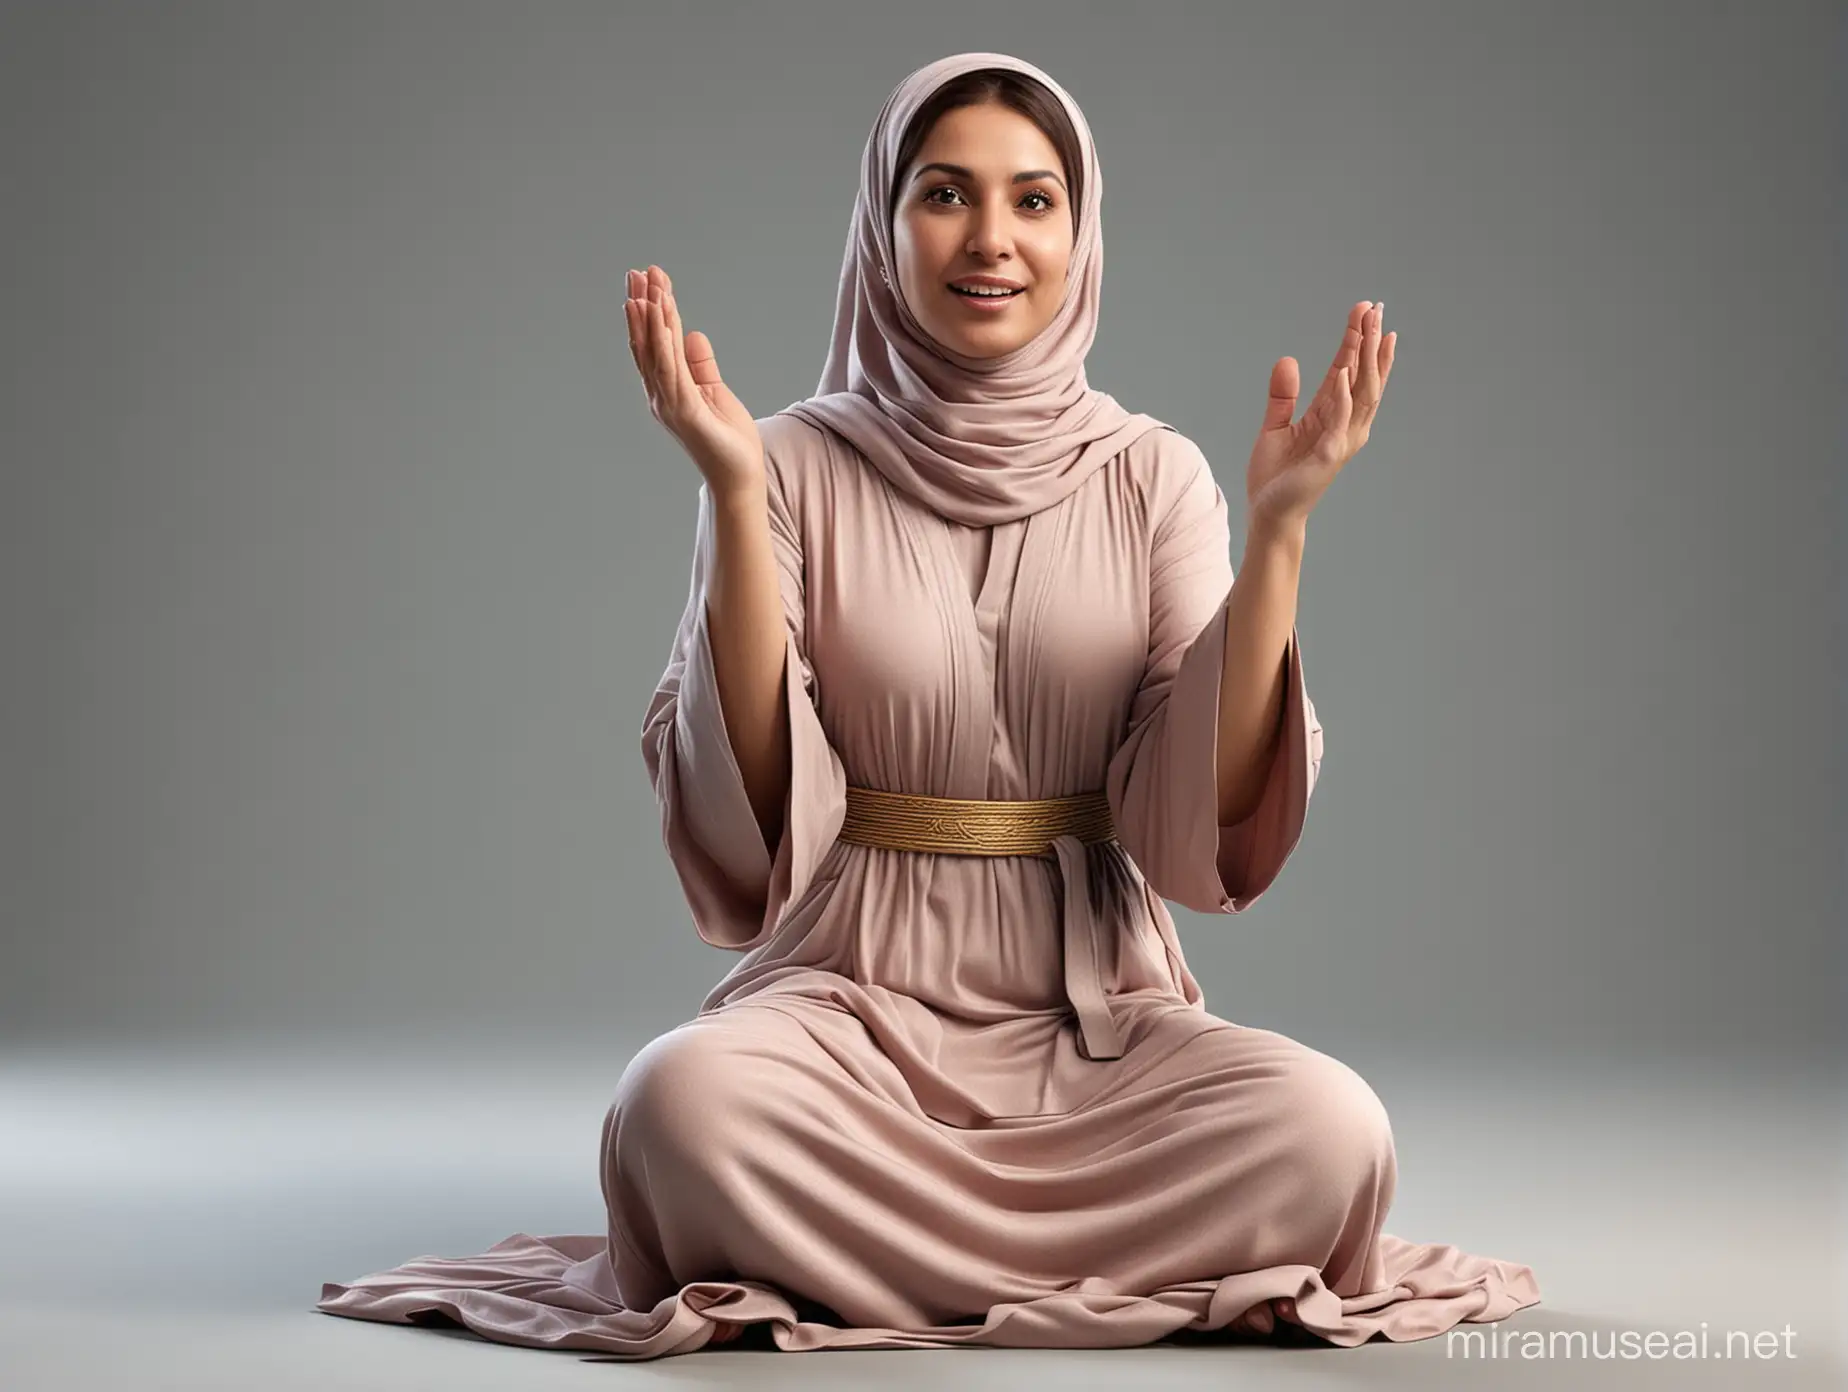 image of a Muslim mother wearing a robe sitting with both hands raised after praying. 3D image, clear and high resolution